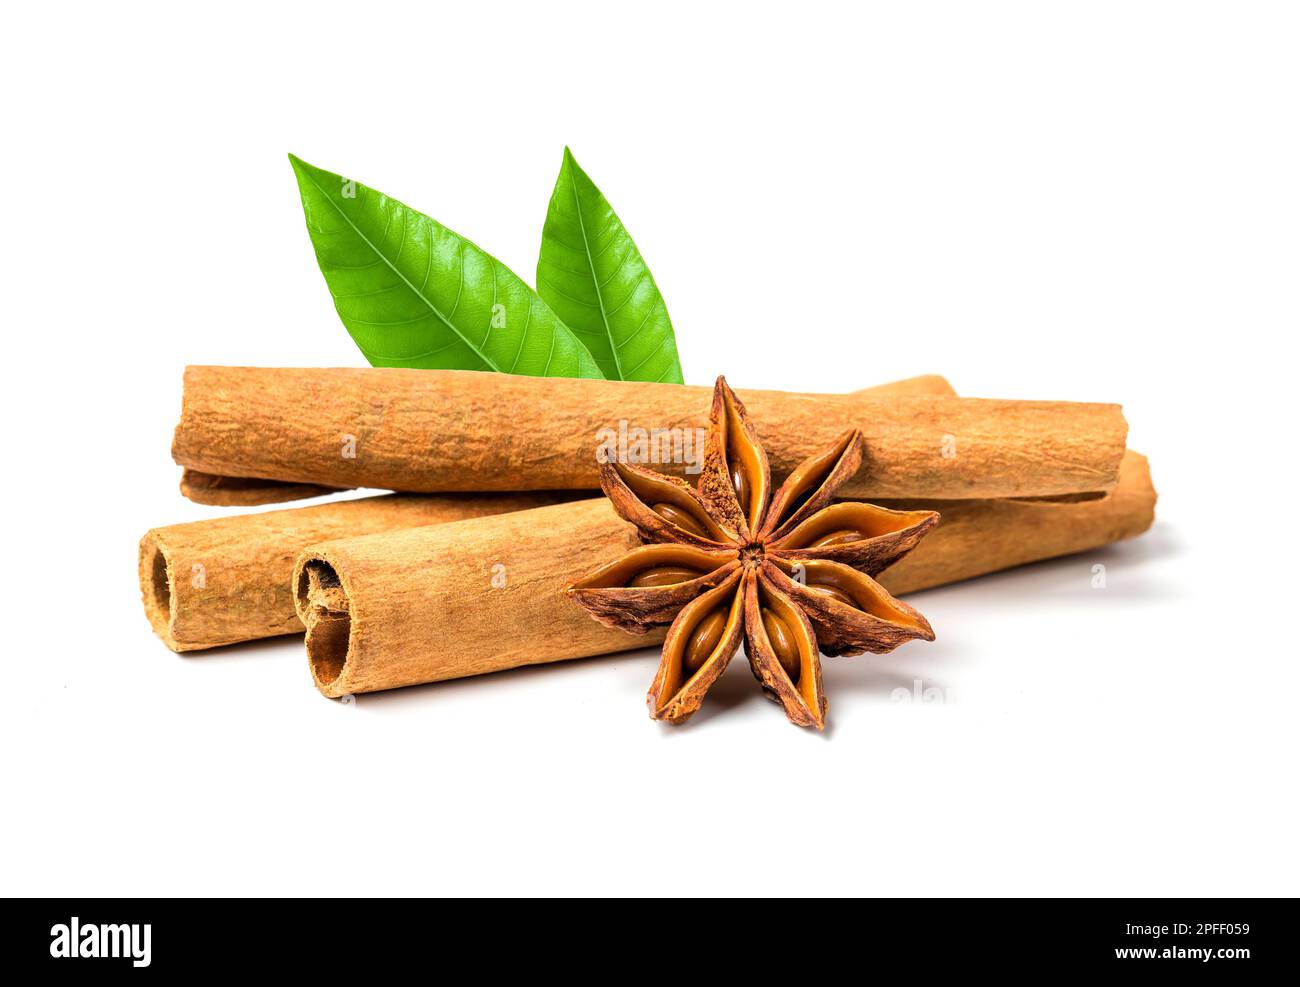 Cinnamon Anise with Leafs on White Background. Kitchen Herbs Stock Photo